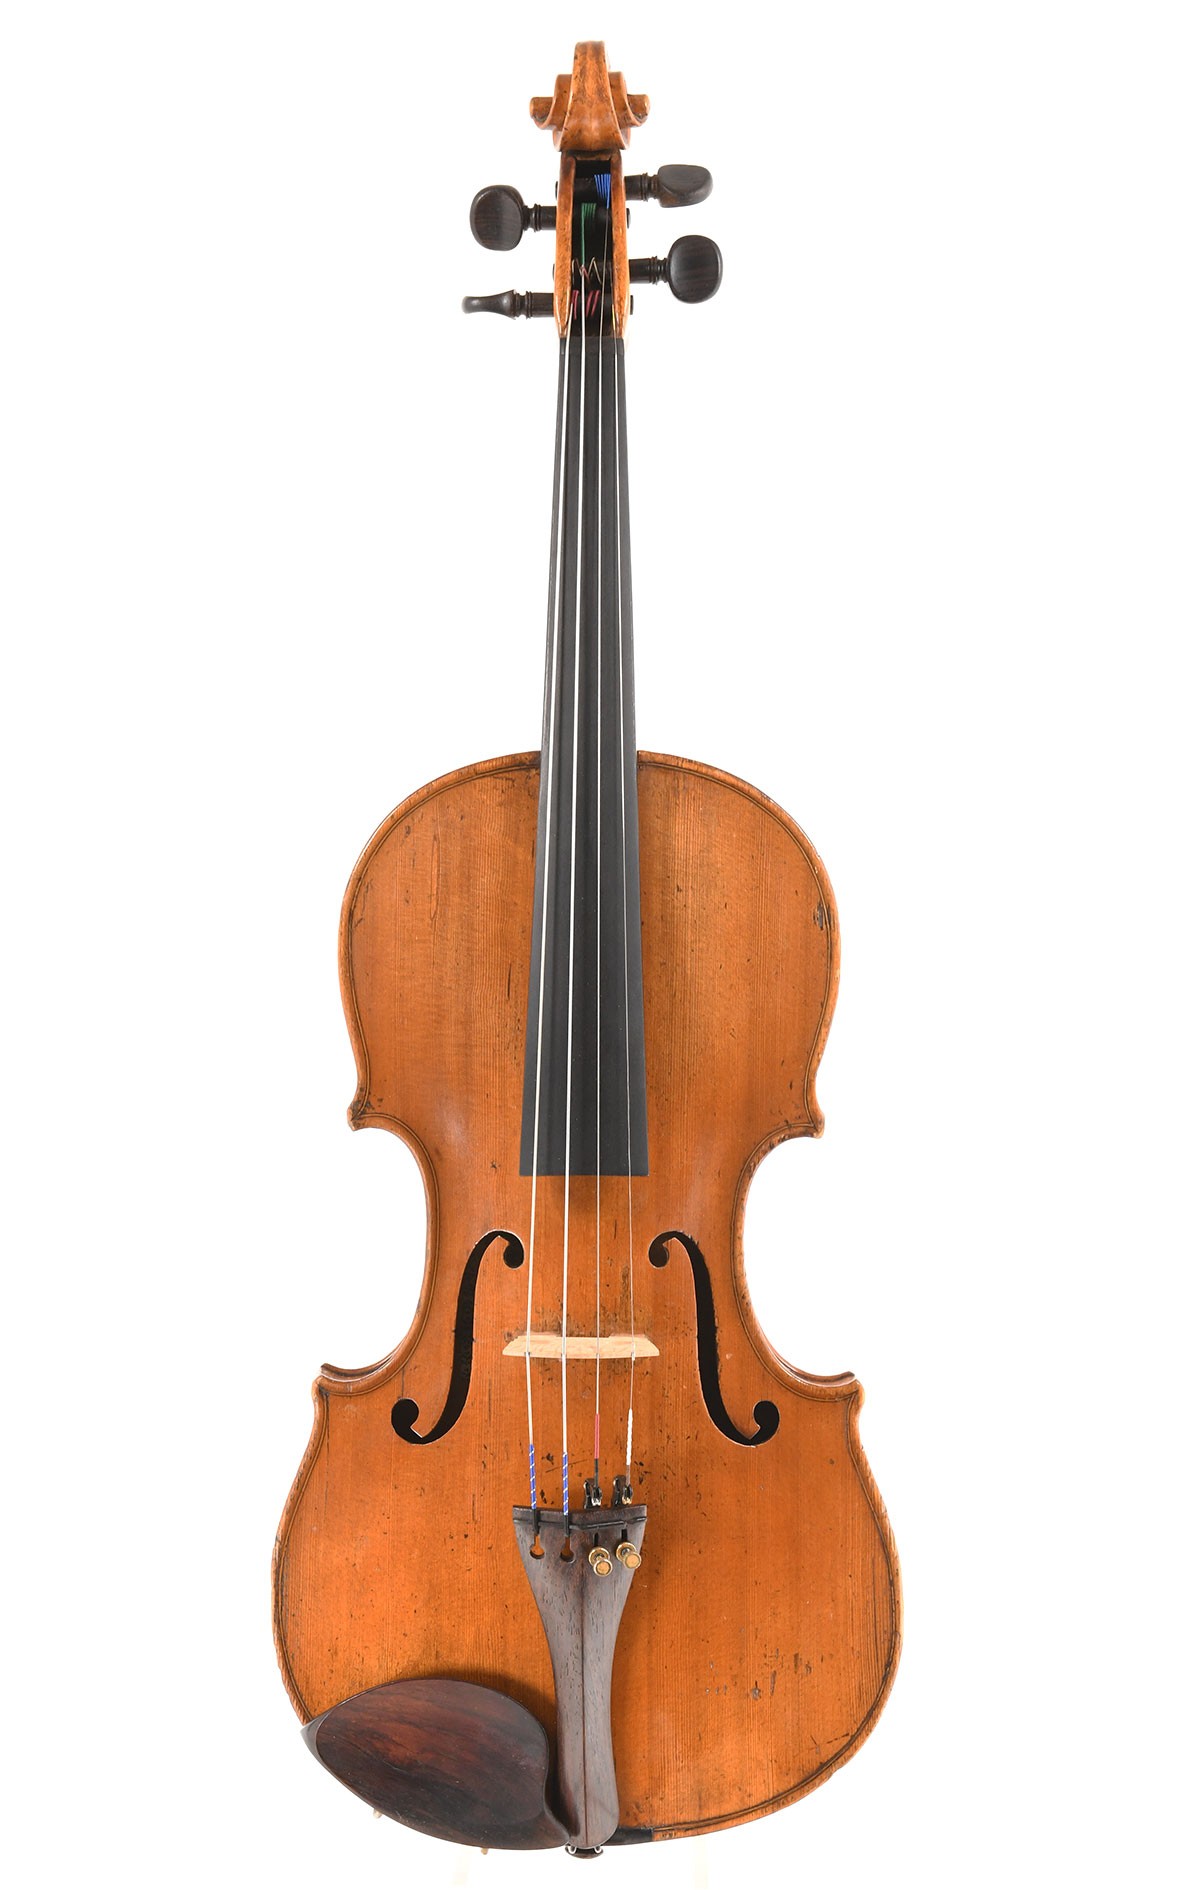 Fine French violin made around 1750 (certificate by Vatelot)